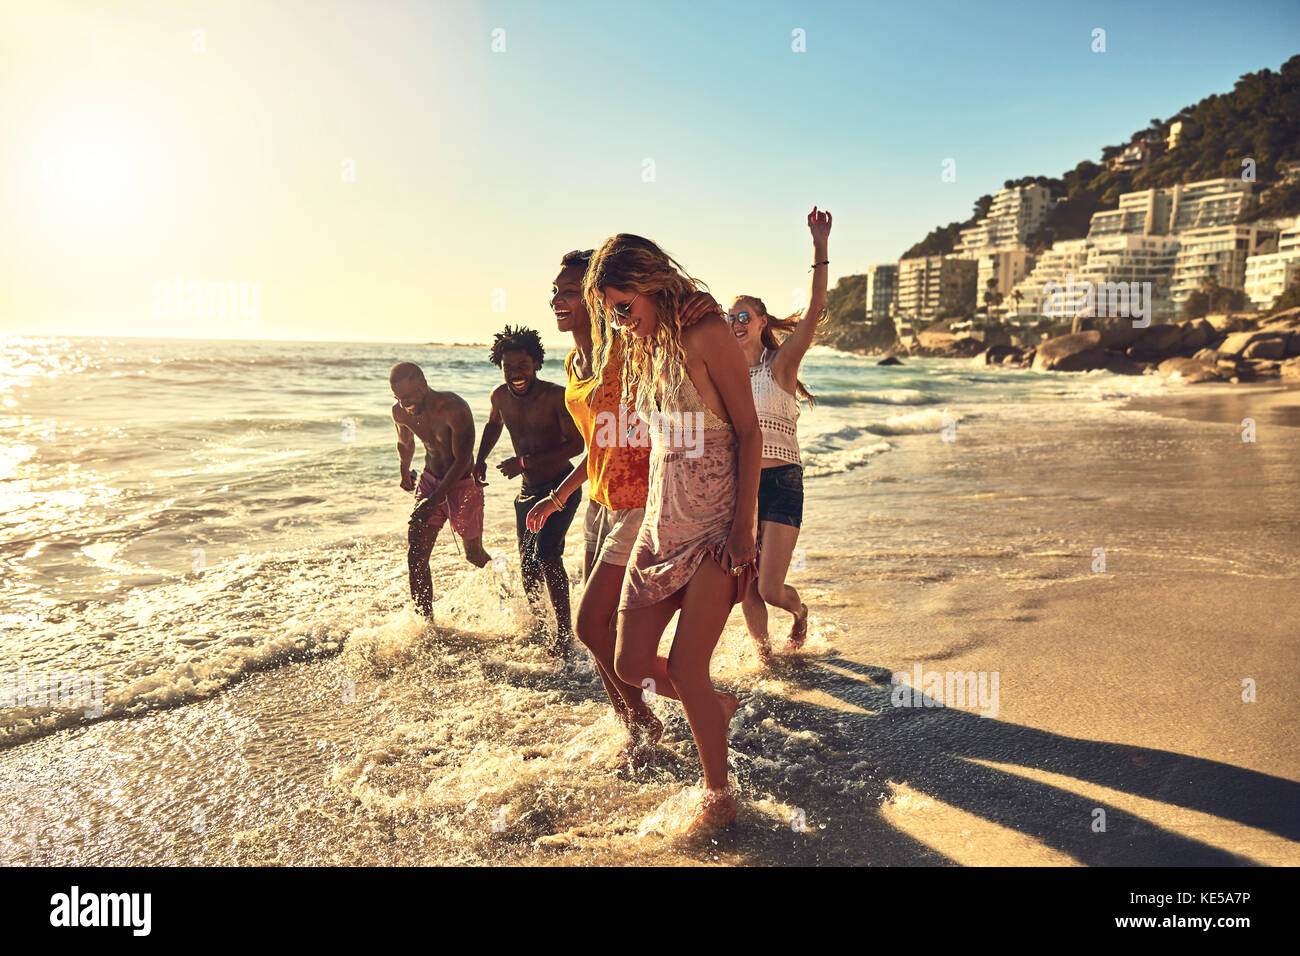 Playful young friends walking in sunny summer ocean surf Stock Photo